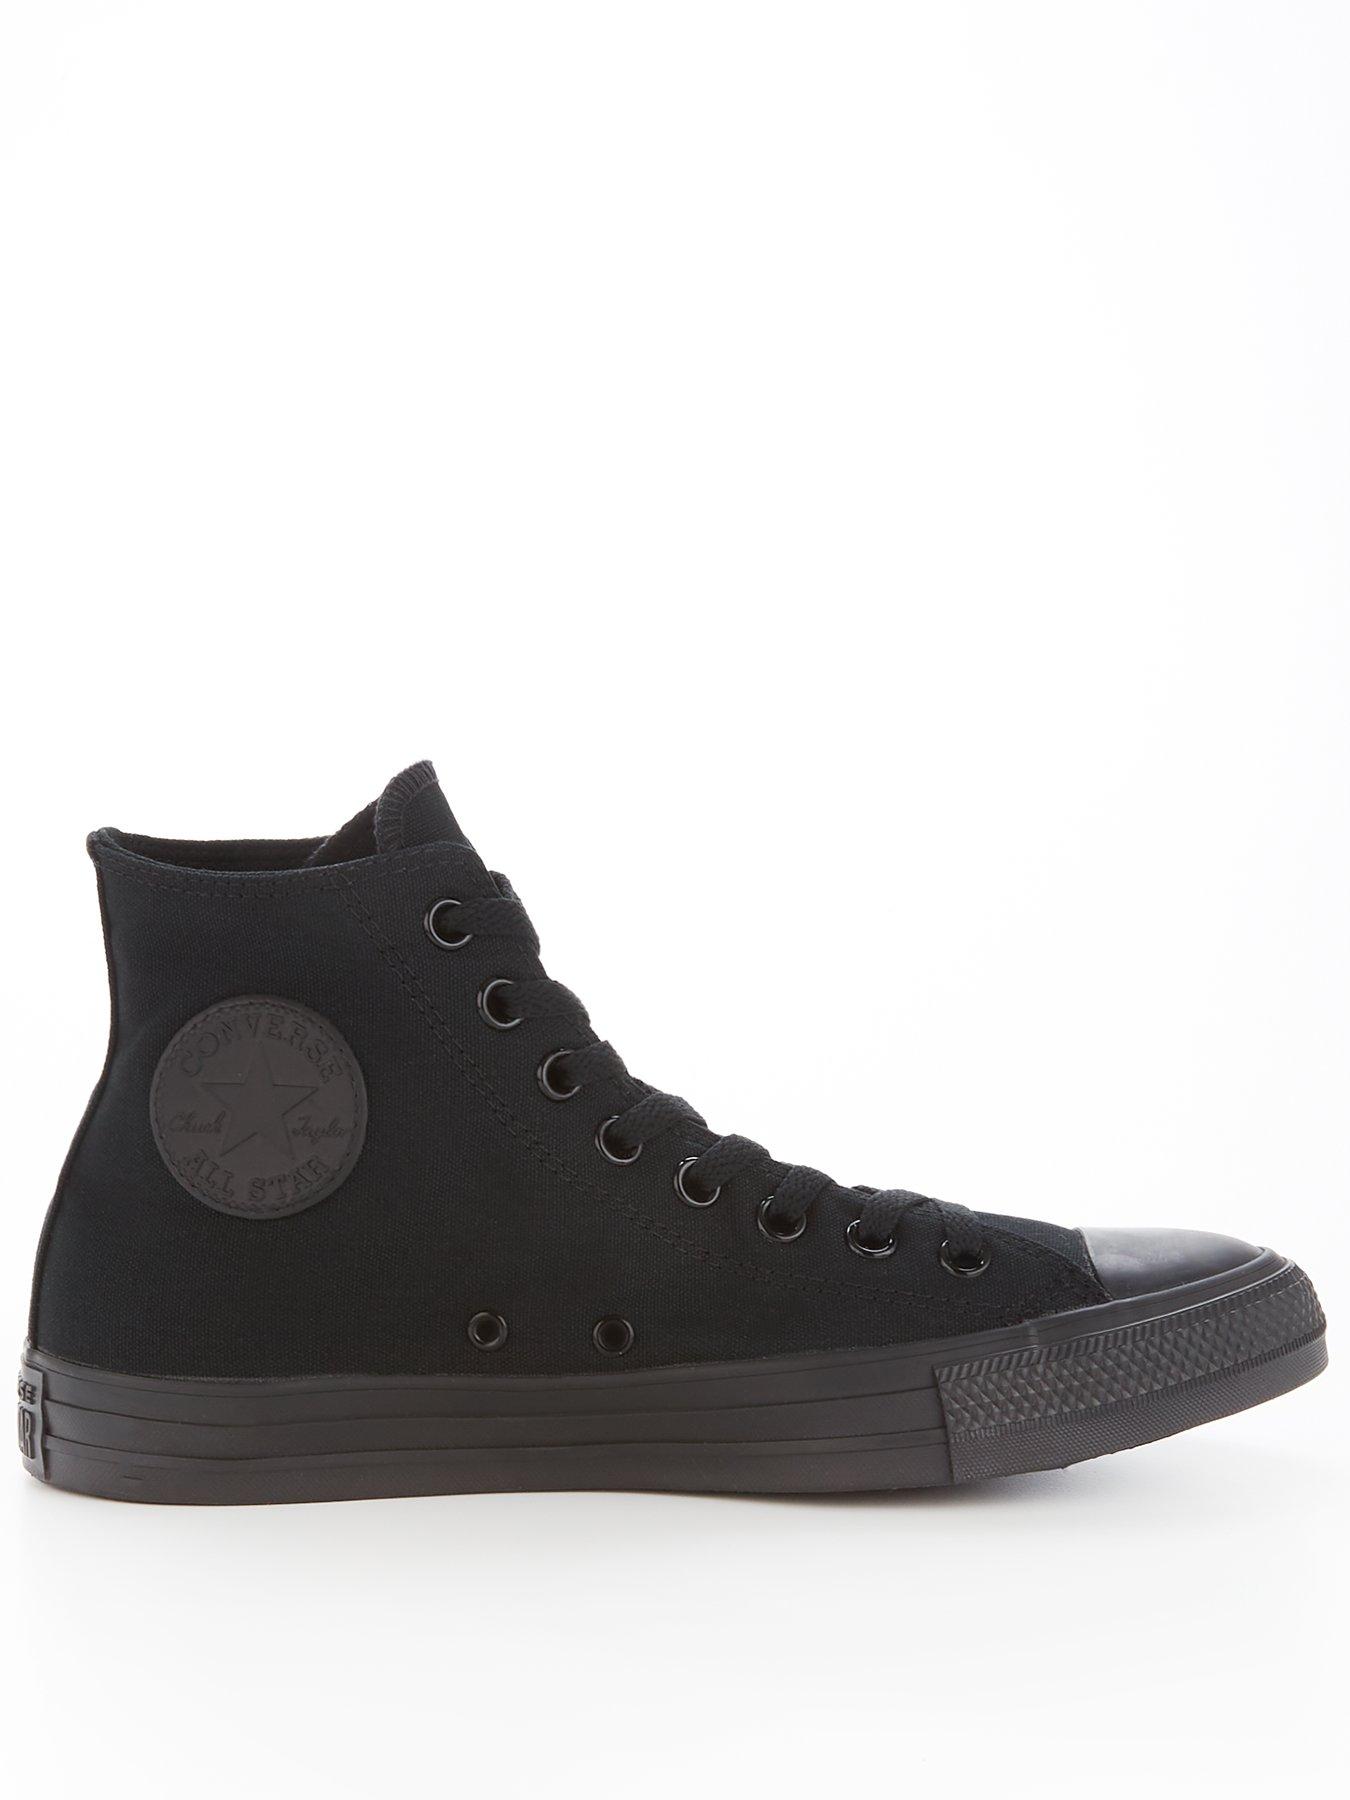 converse trainers mens